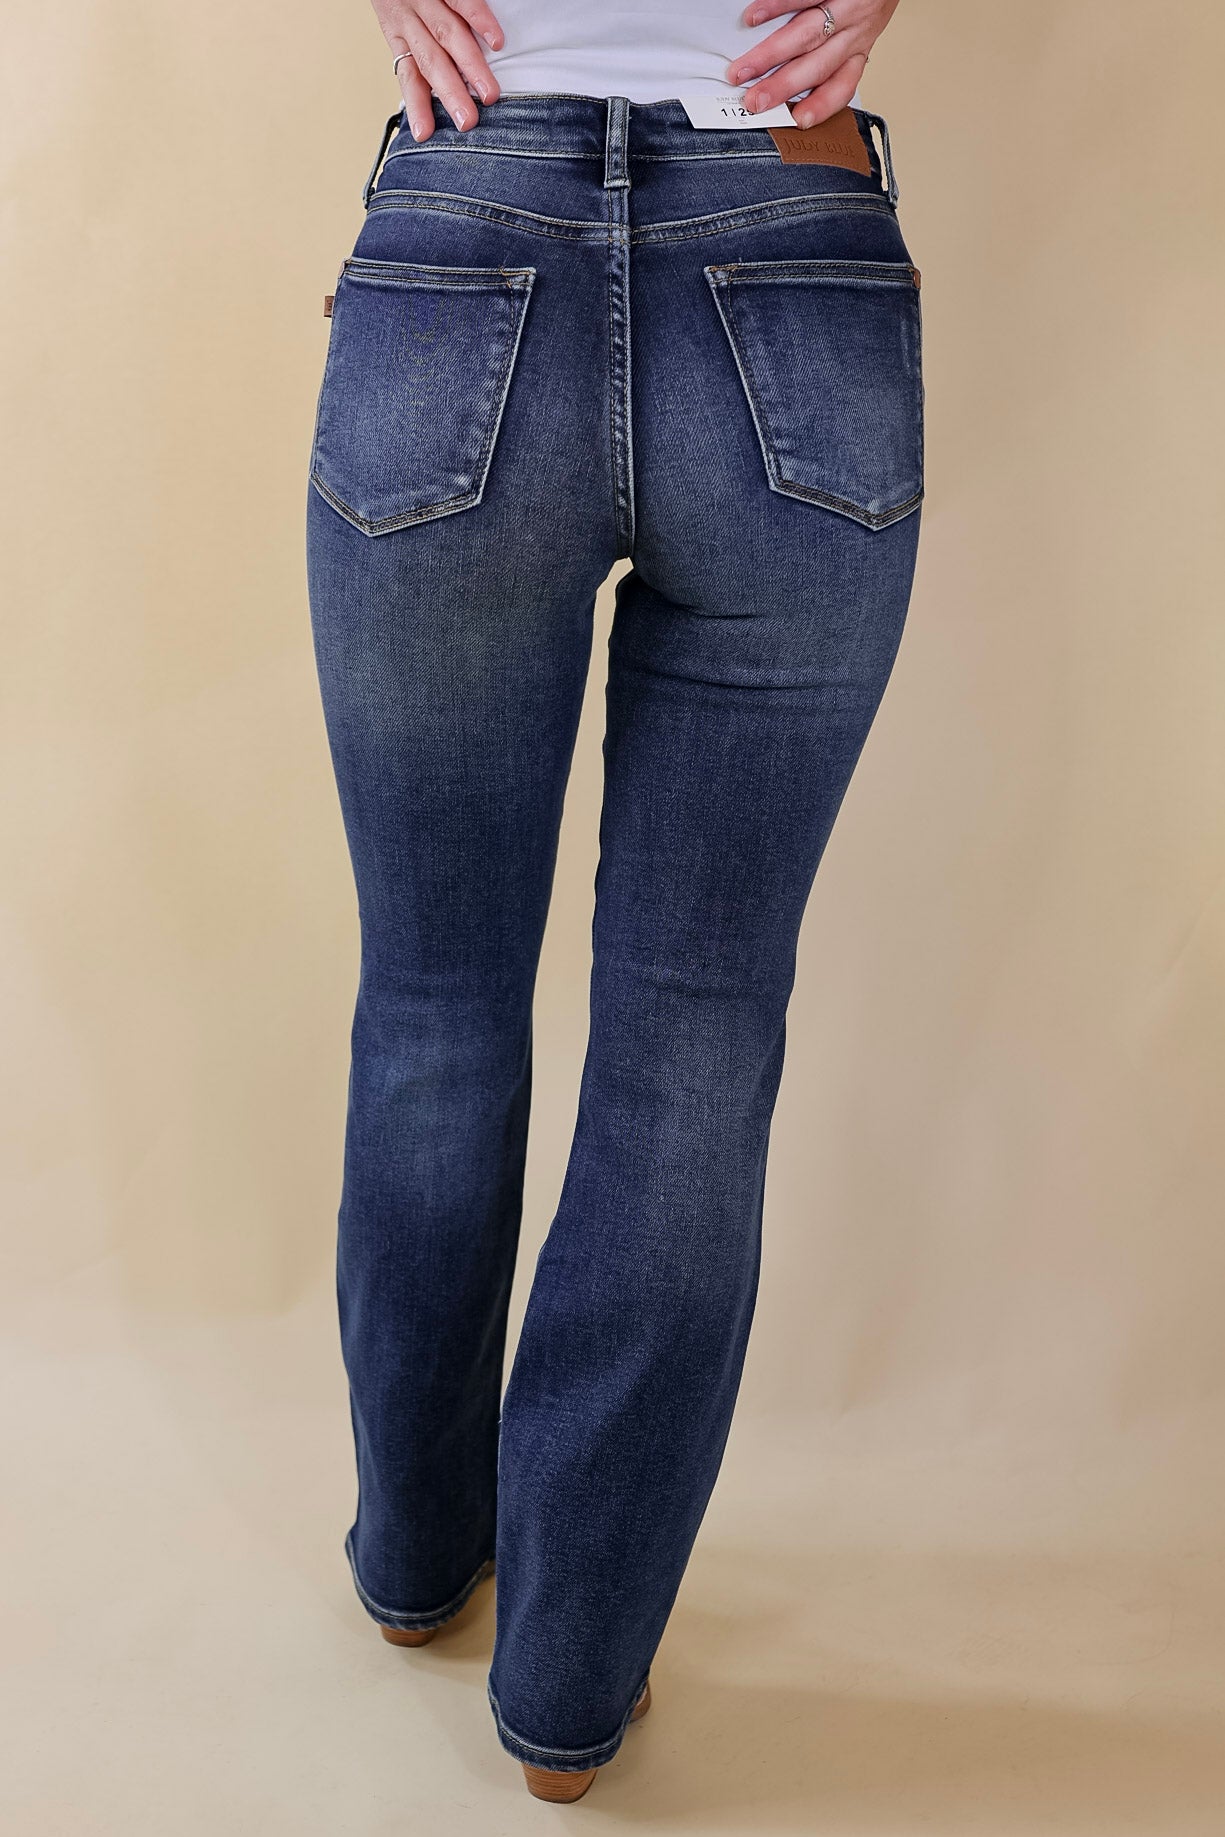 Judy Blue | Confident Energy Bootcut Jeans in Vintage Wash - Giddy Up Glamour Boutique